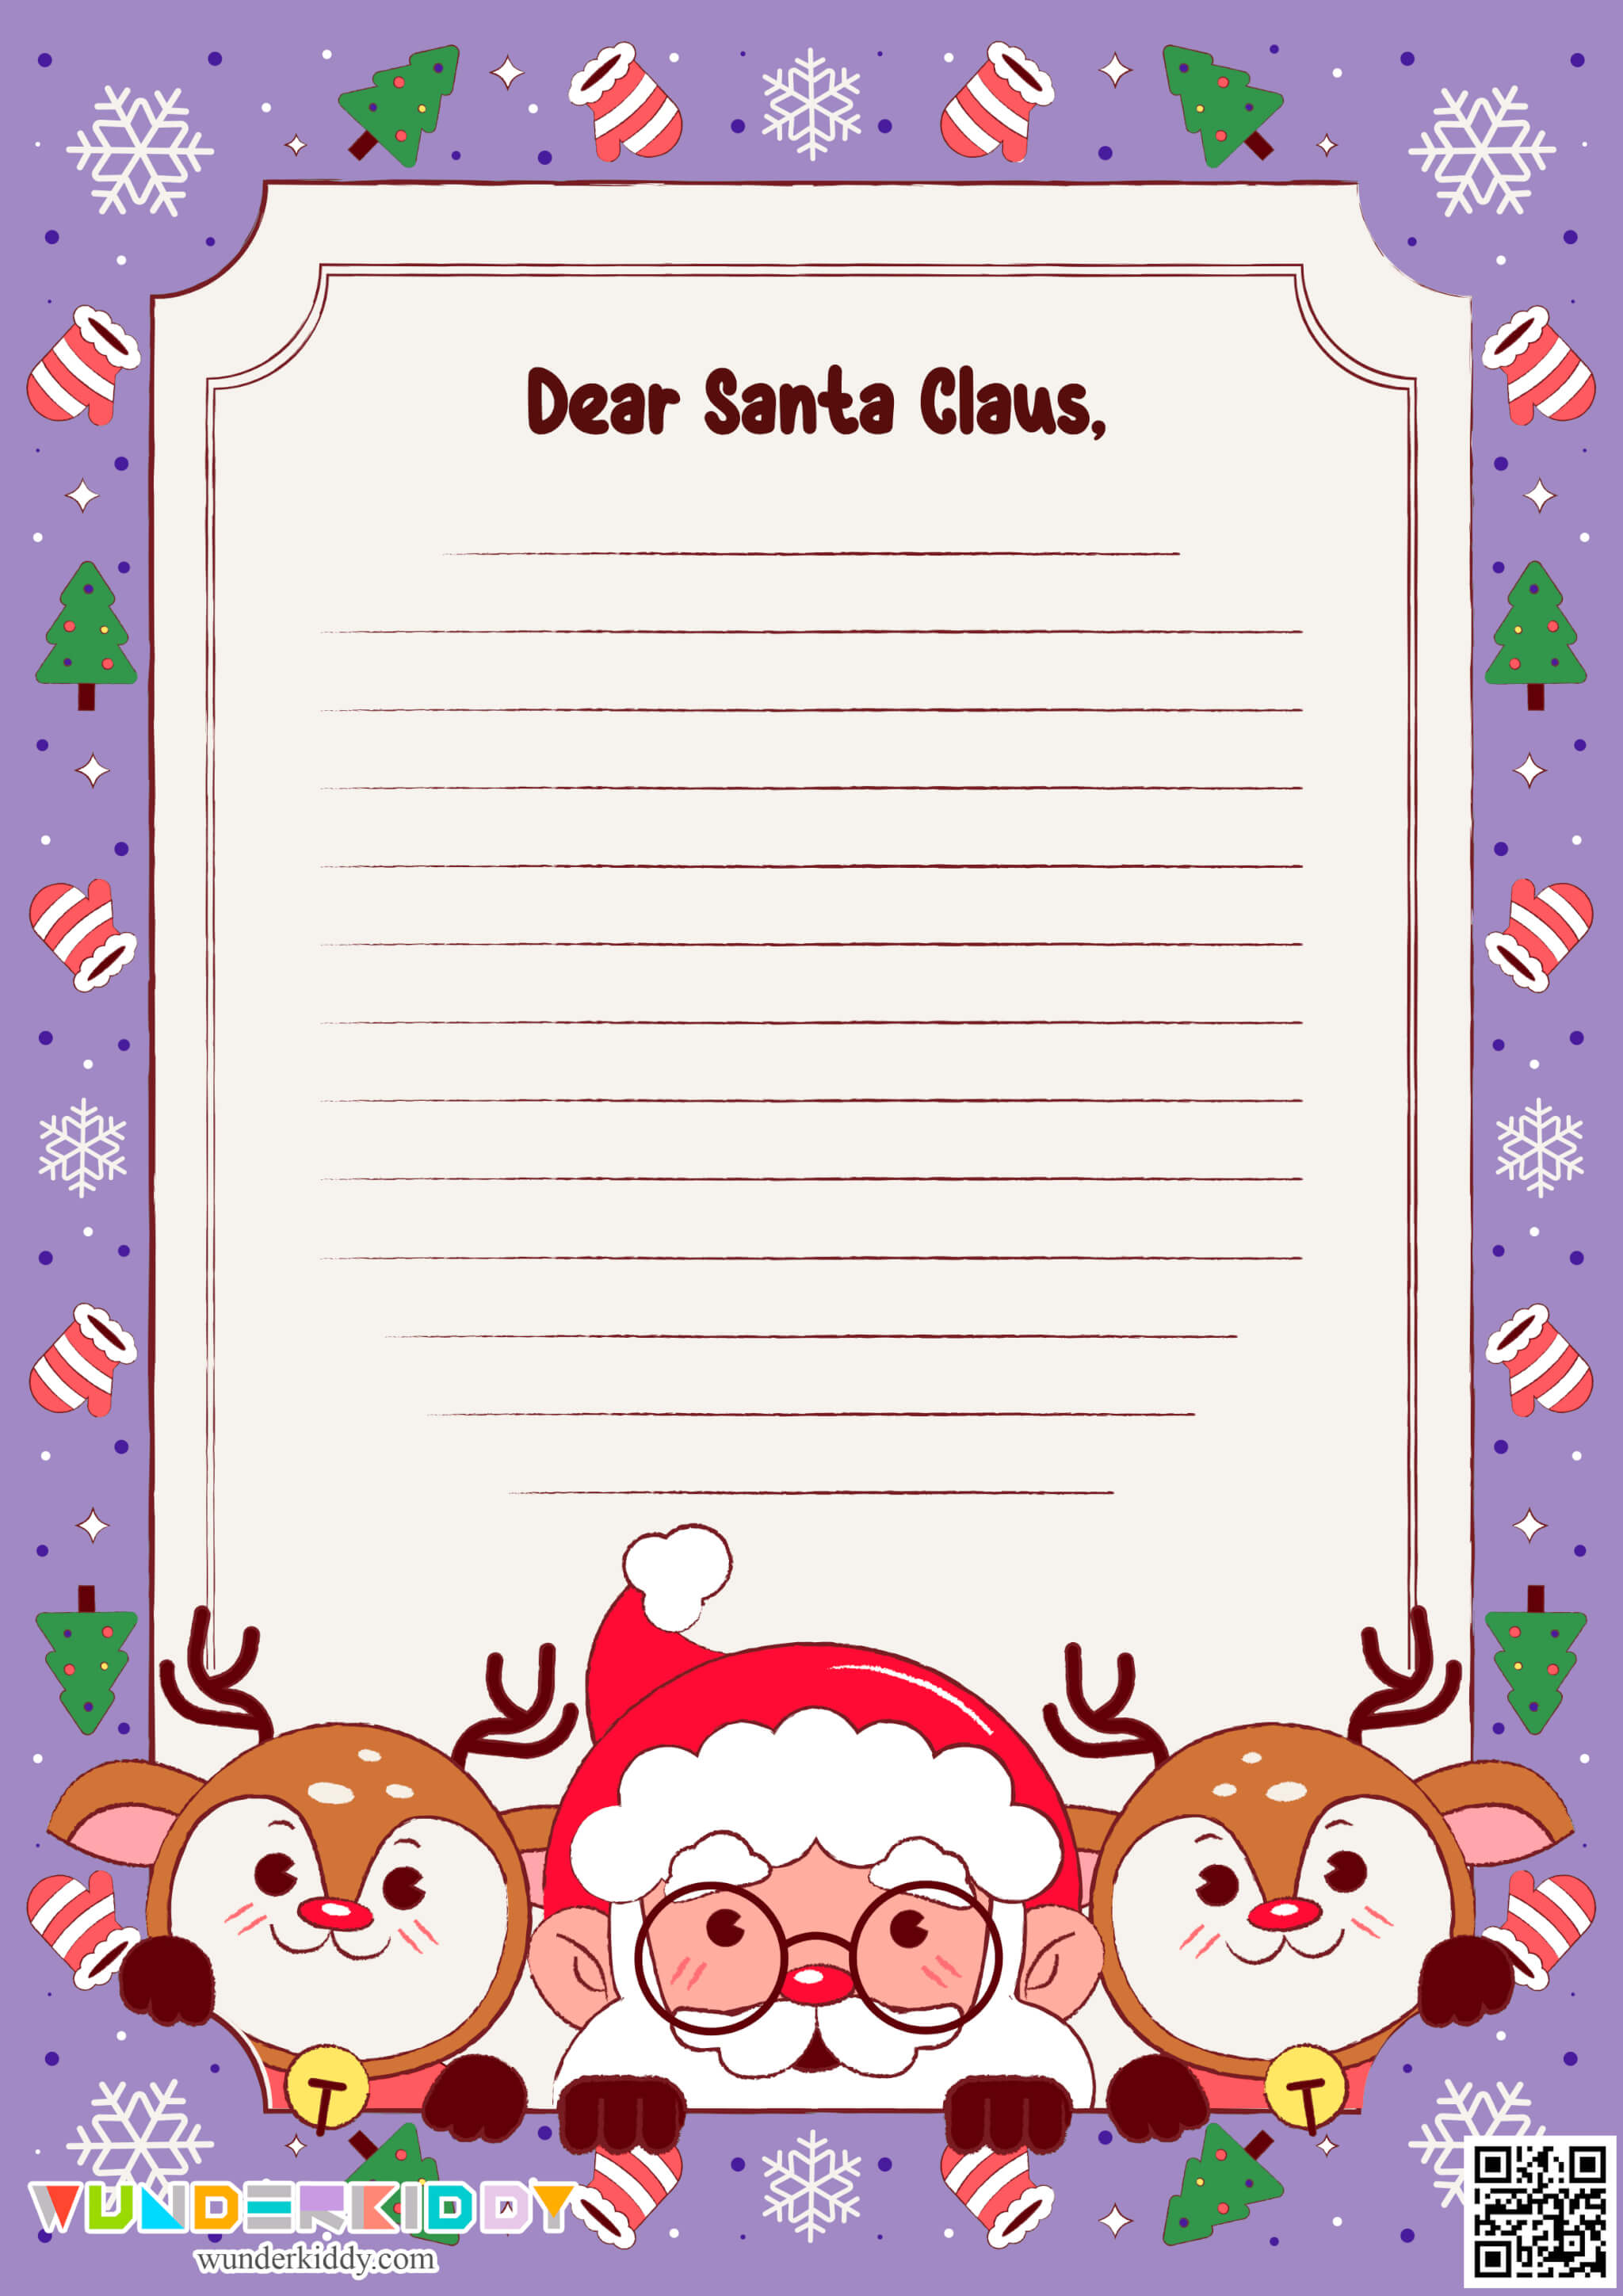 Letter to Santa Template - Image 3